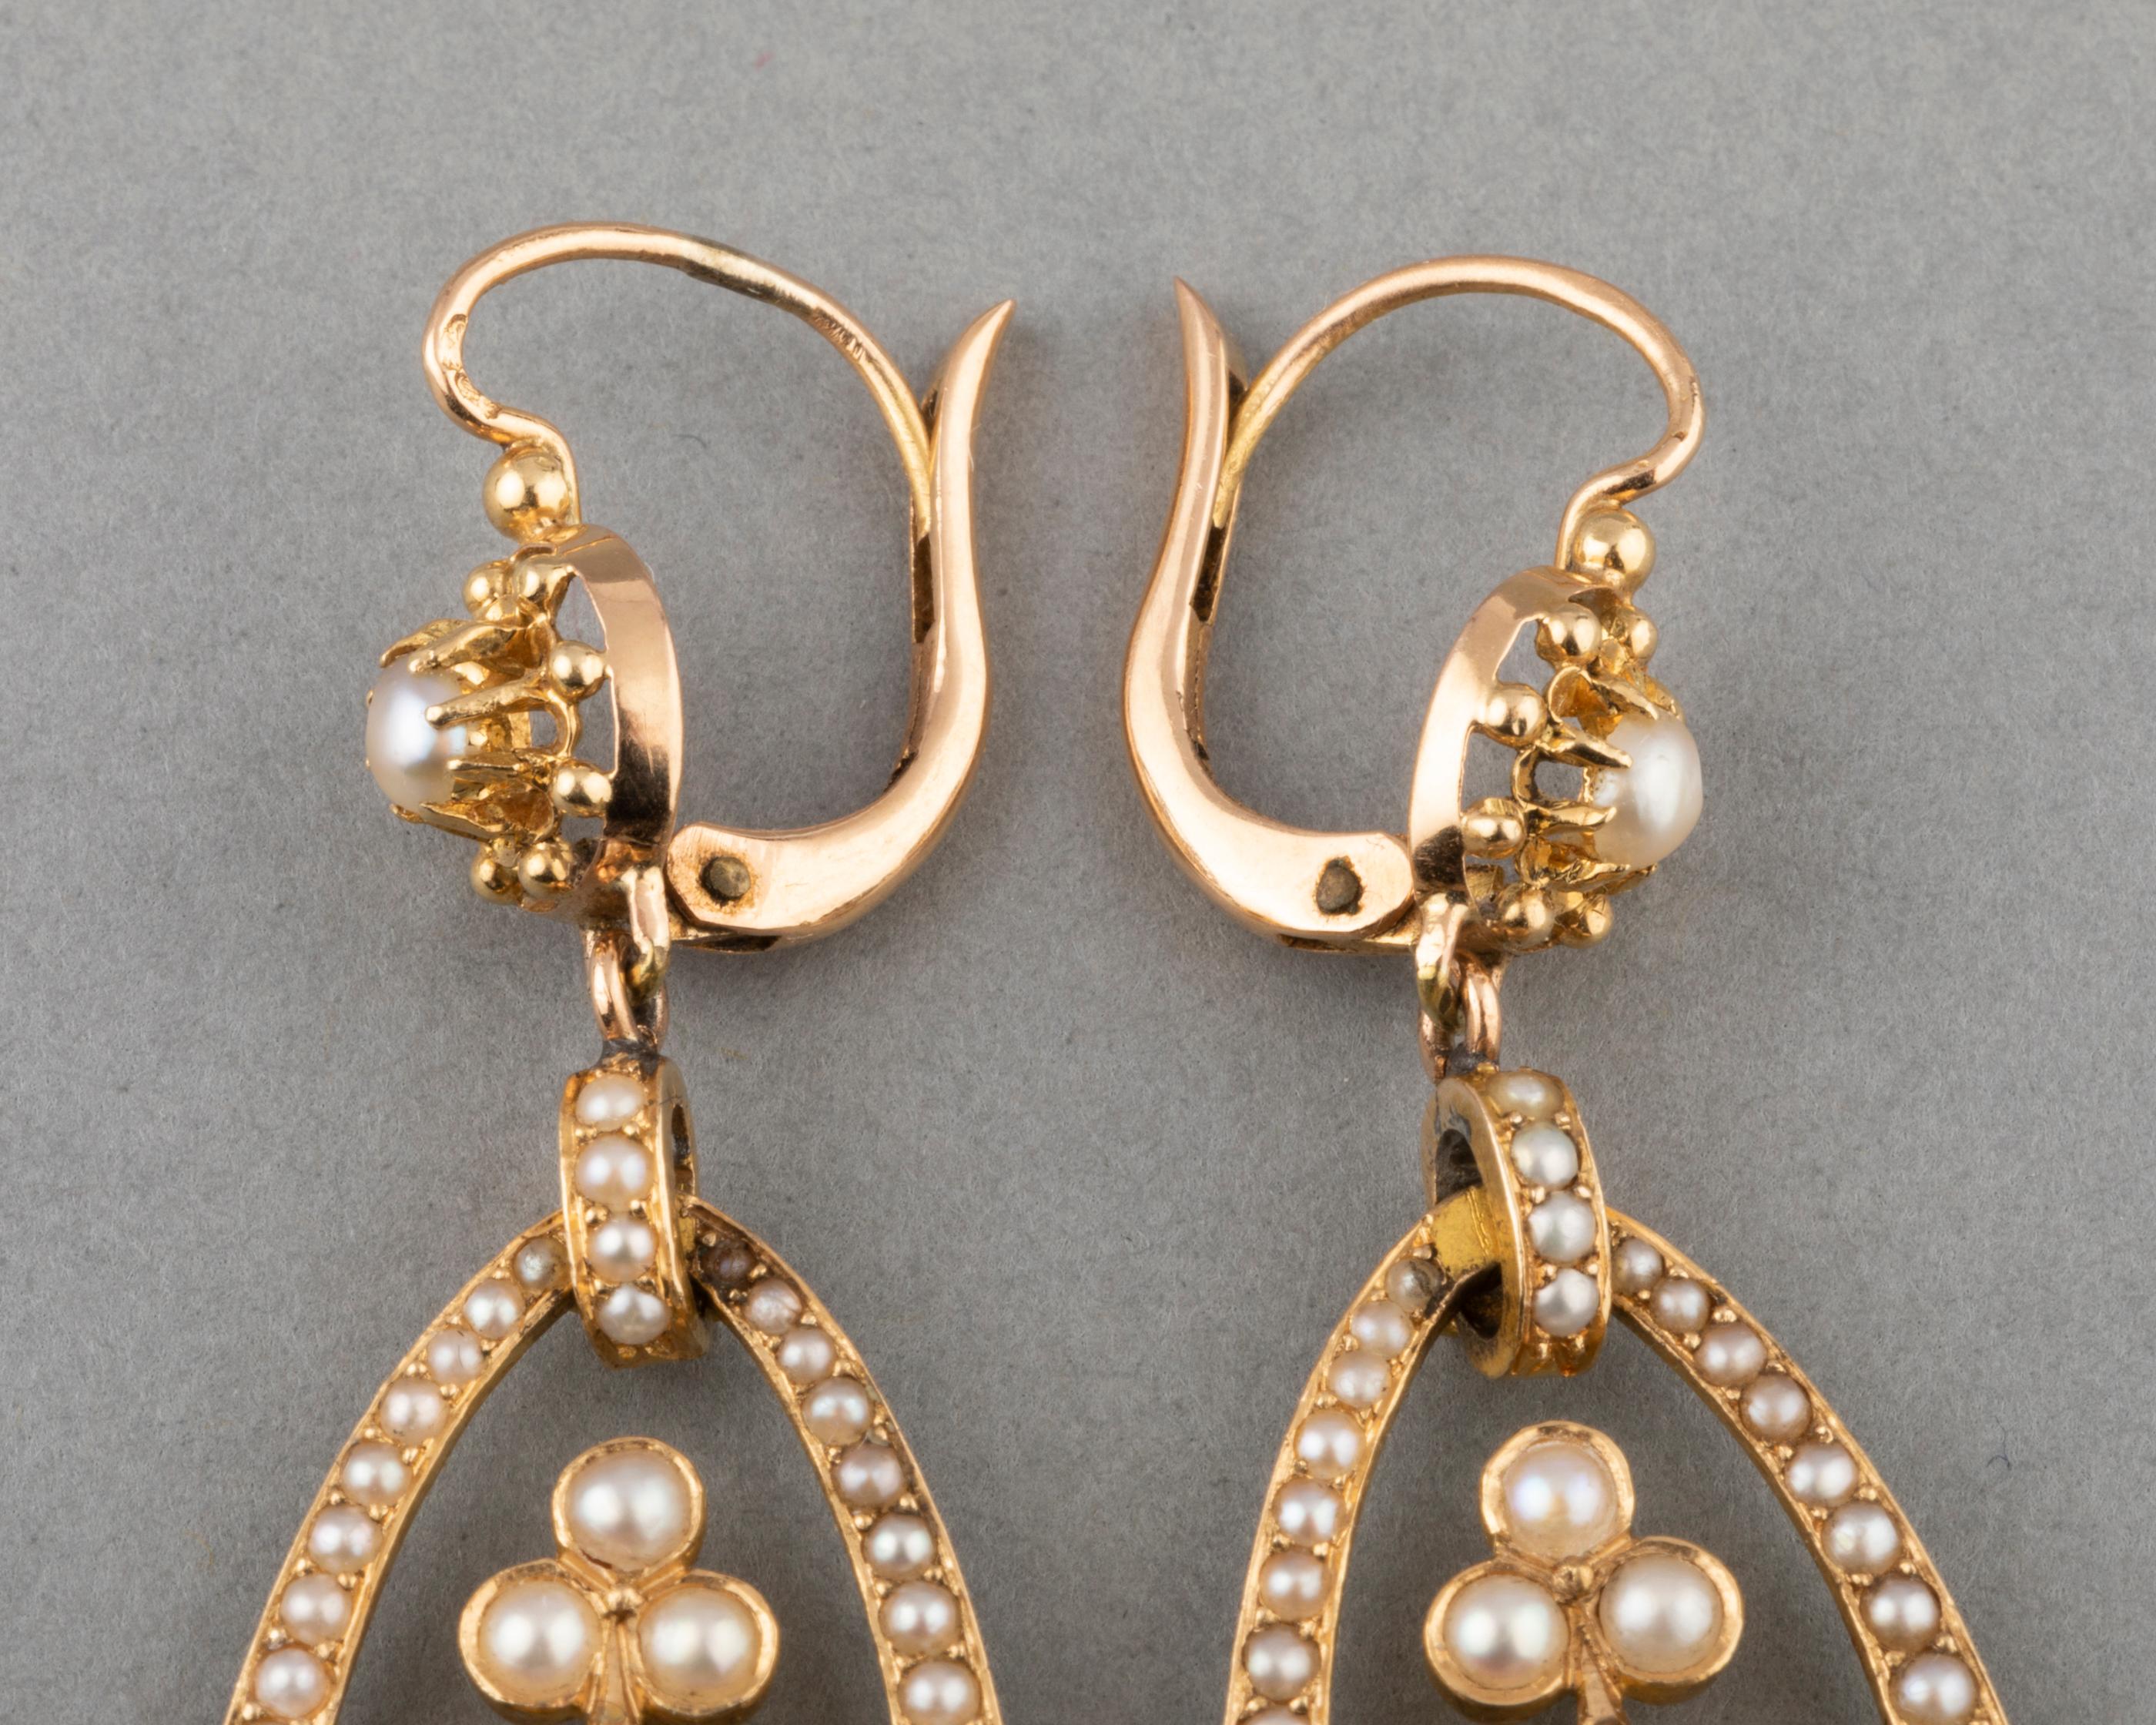 Antique Gold Garnets and Pearls Earrings For Sale 3